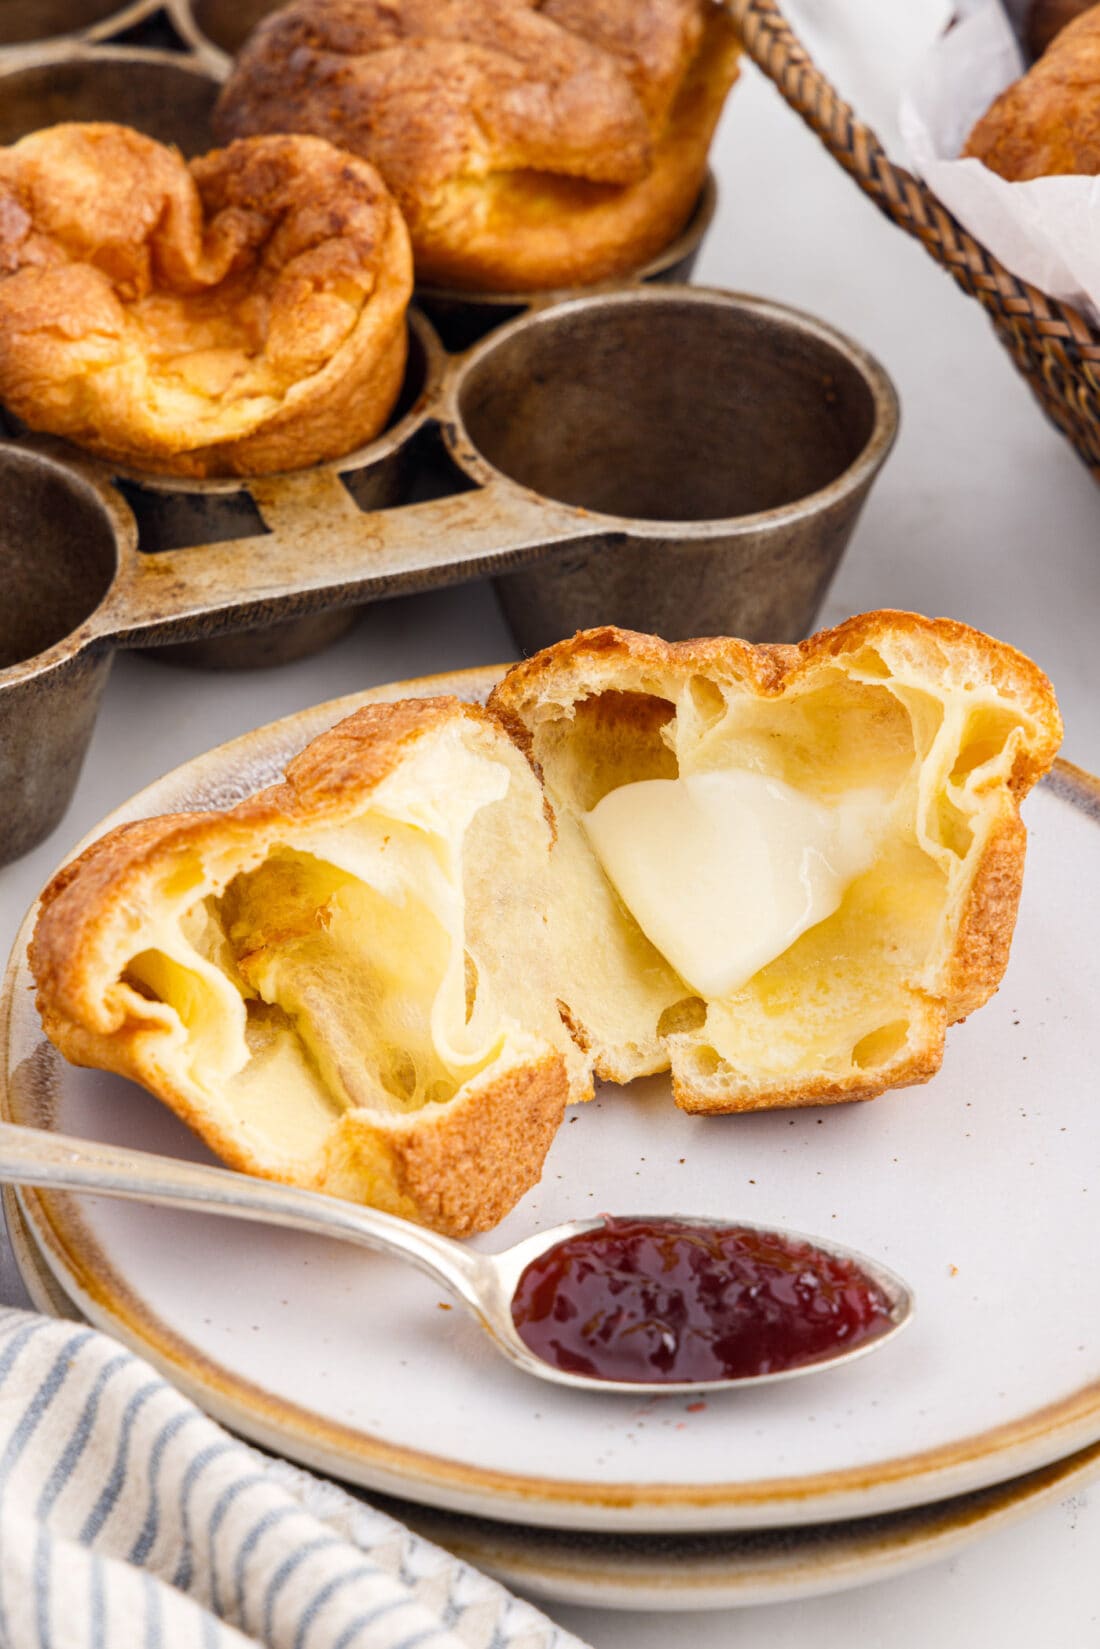 Popover with butter and jam